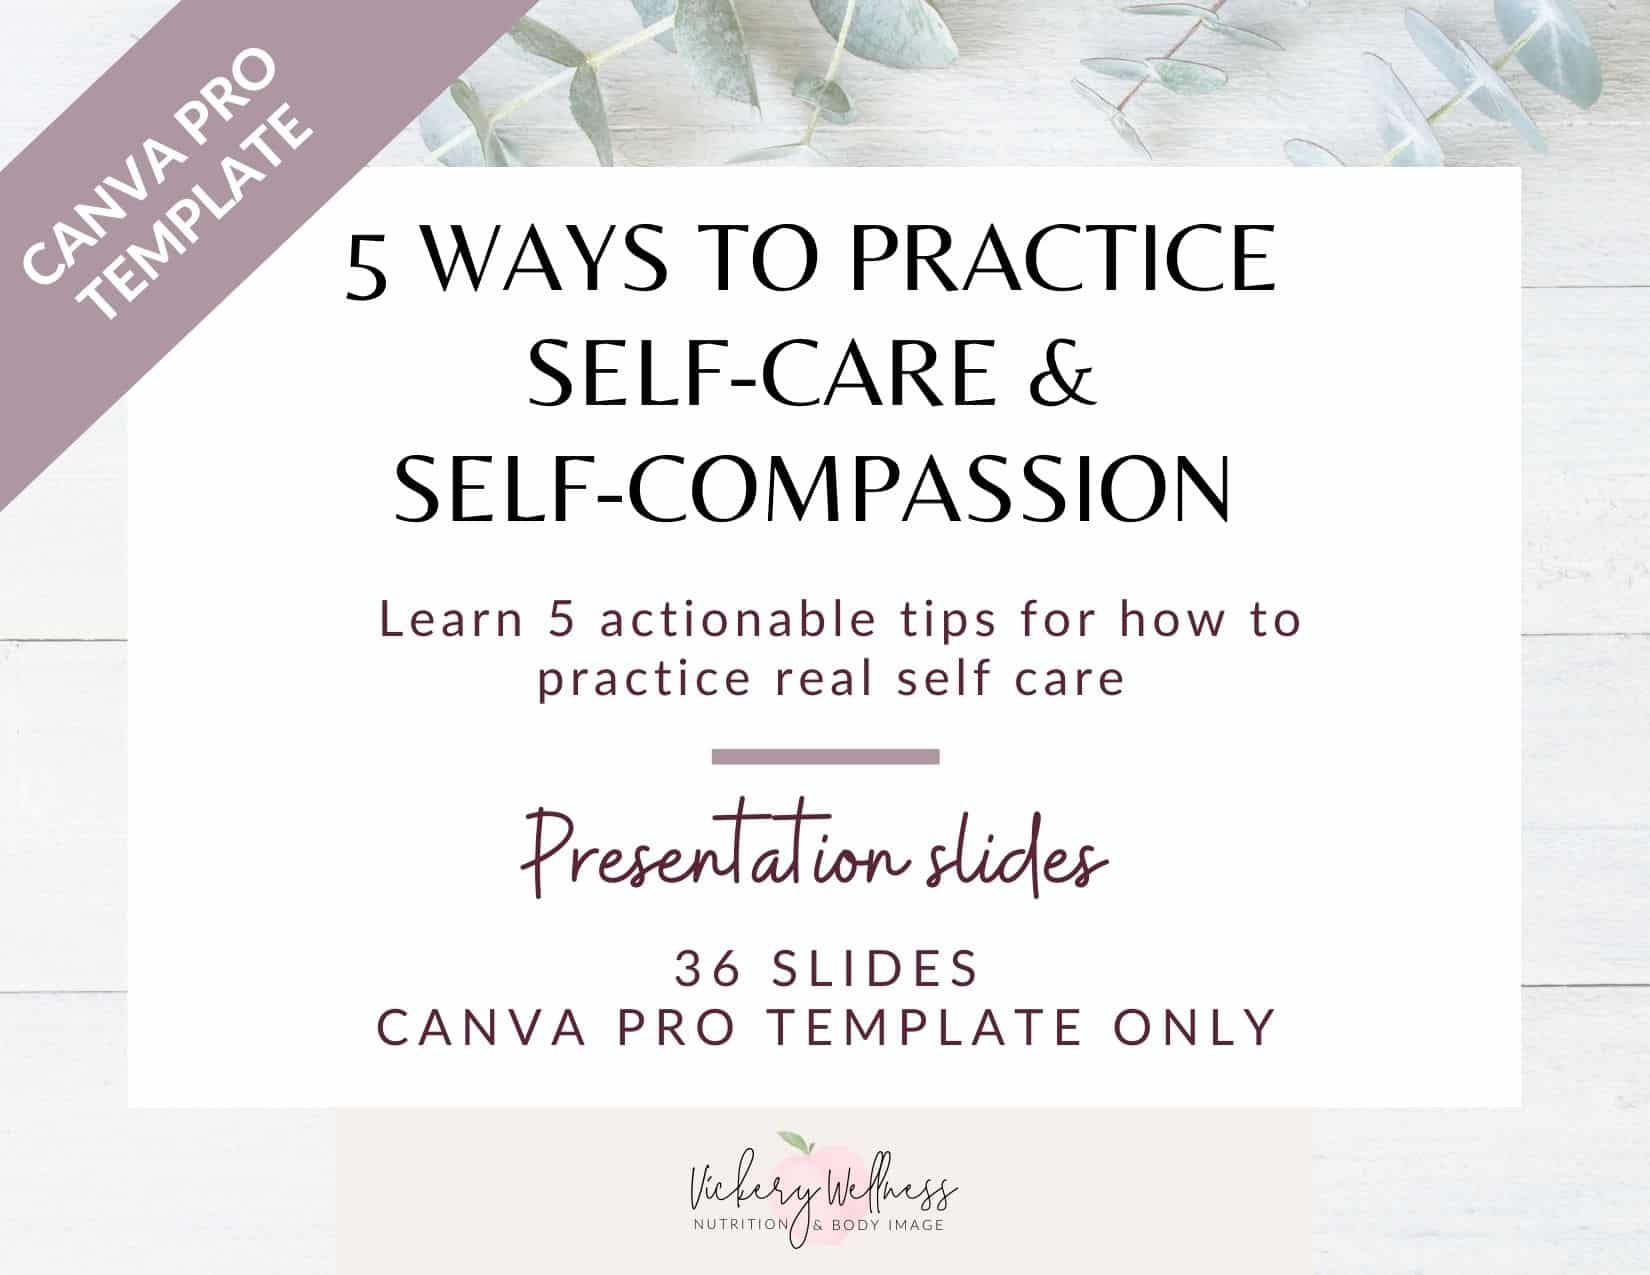 5 ways to practice self care & self compassion presentation slides for professionals